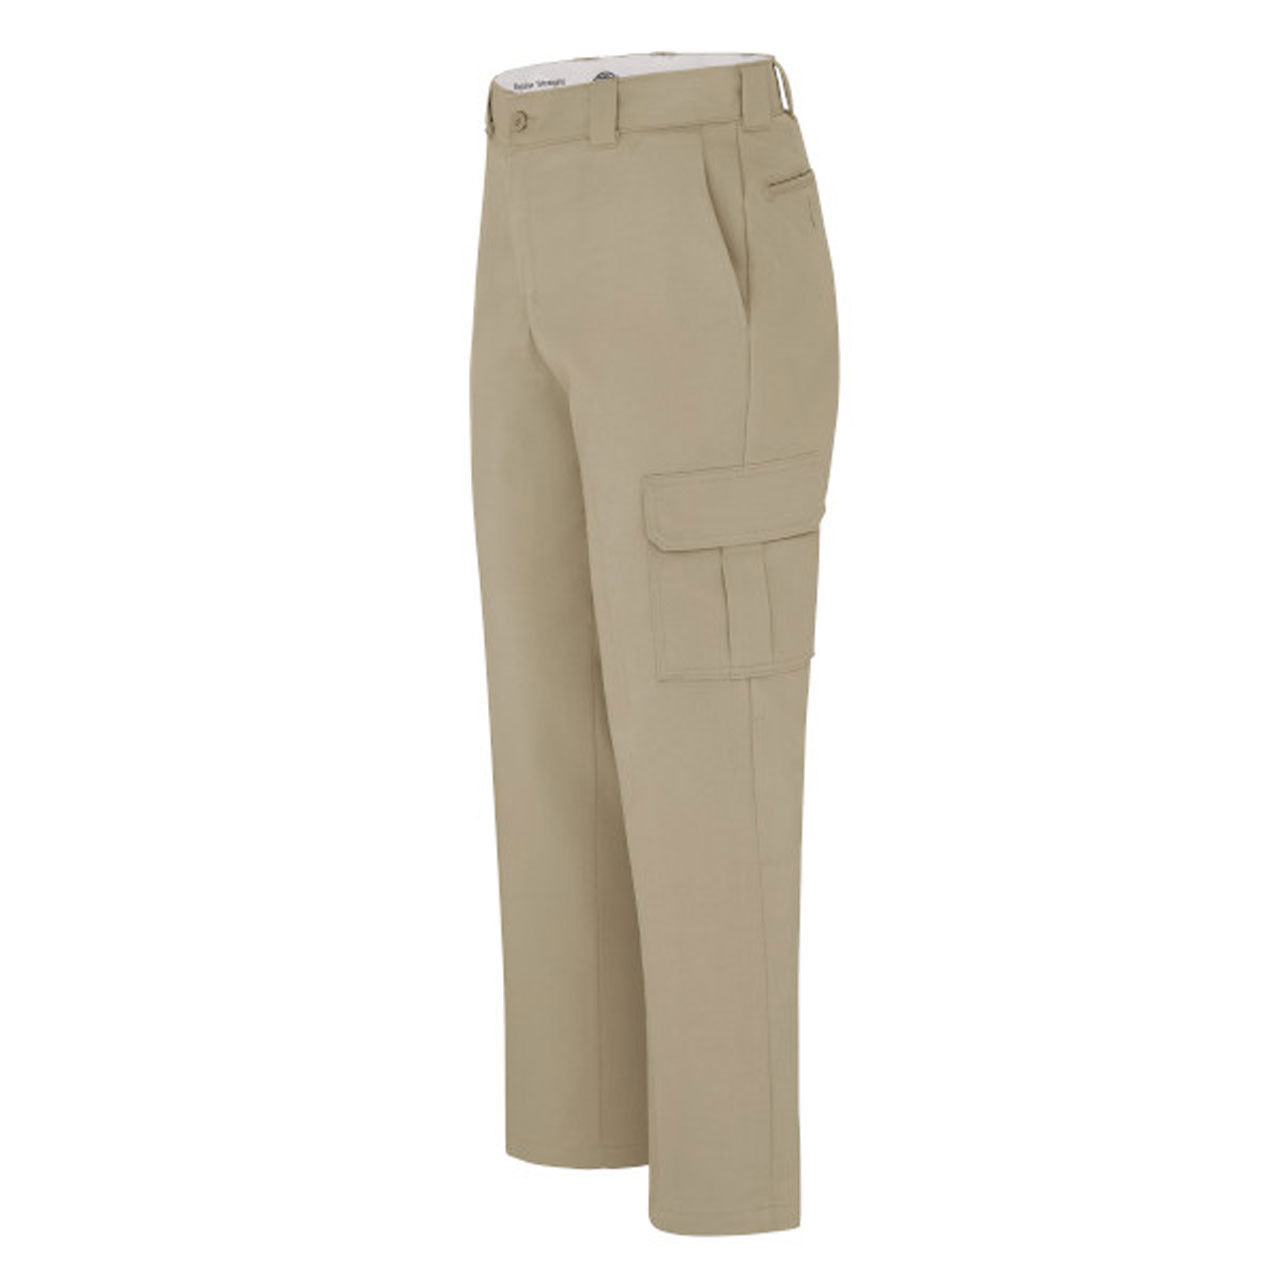 Are Dickies flexible and durable cargo pants a good work pant?